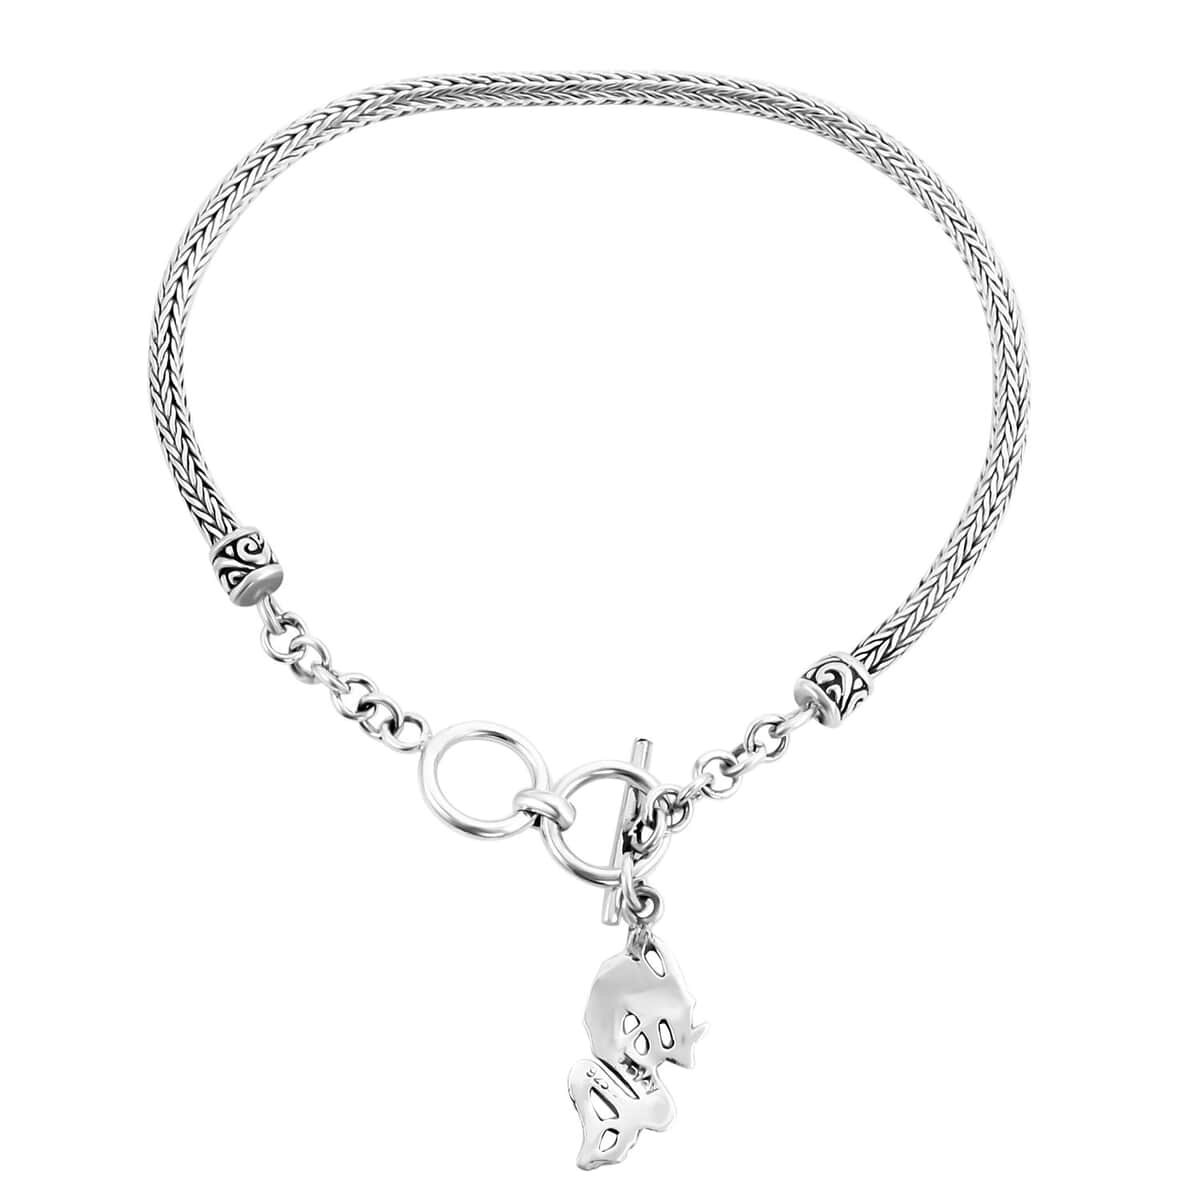 Bali Legacy Sterling Silver Tulang Naga Dragon Bracelet with Dragon Charm (6.50-8.0In) 8.20 Grams image number 2